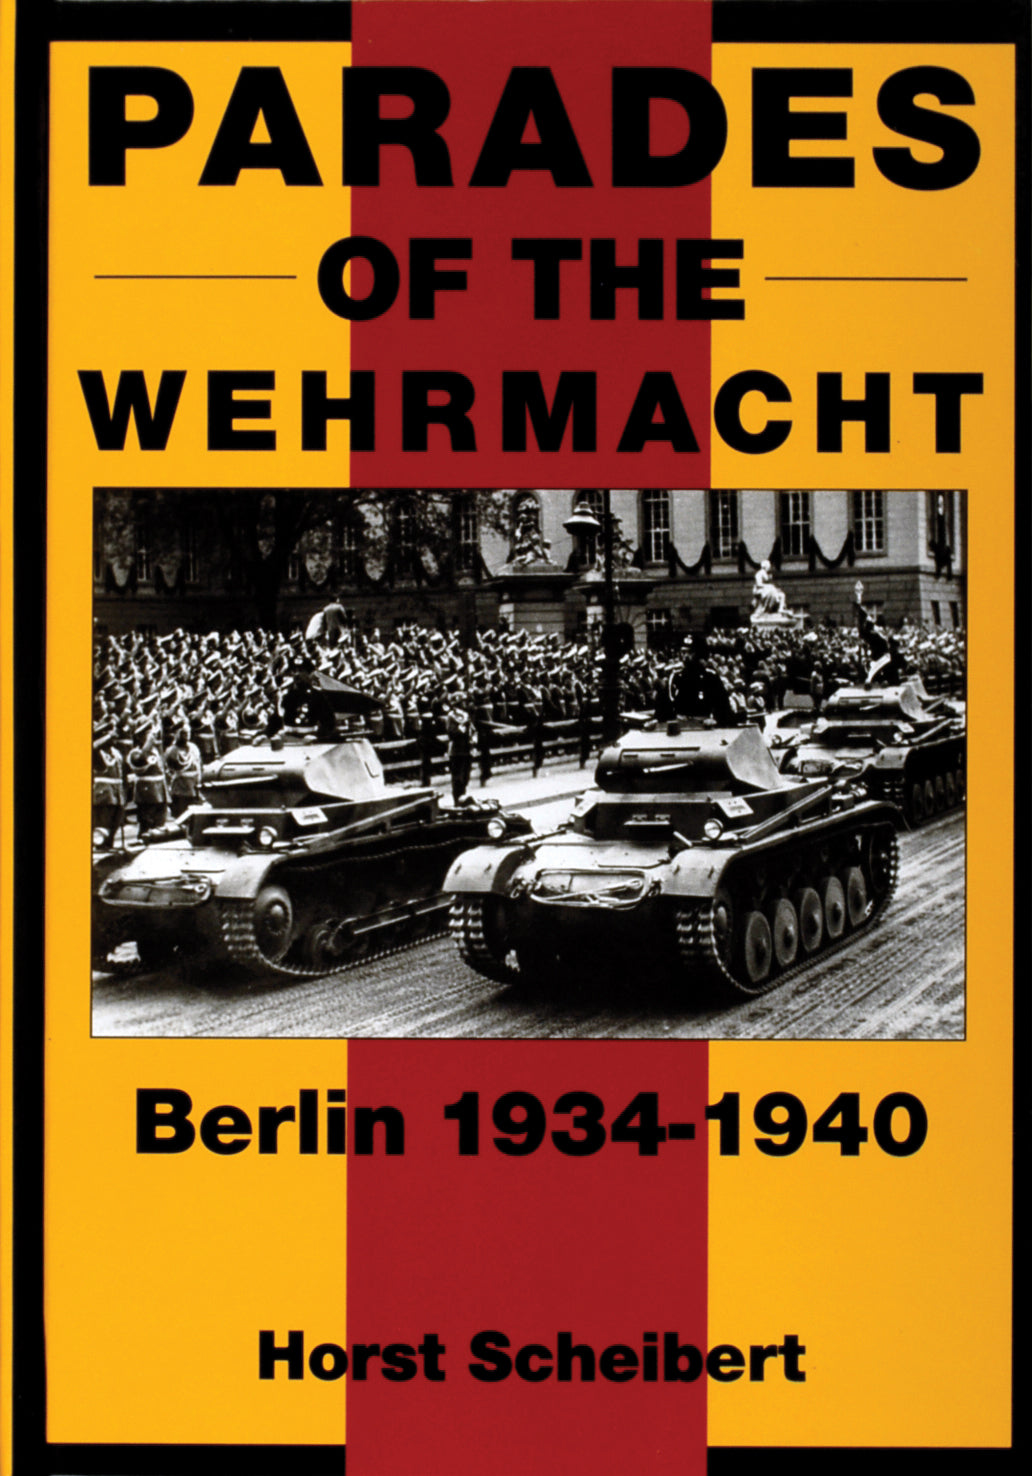 Parades of the Wehrmacht